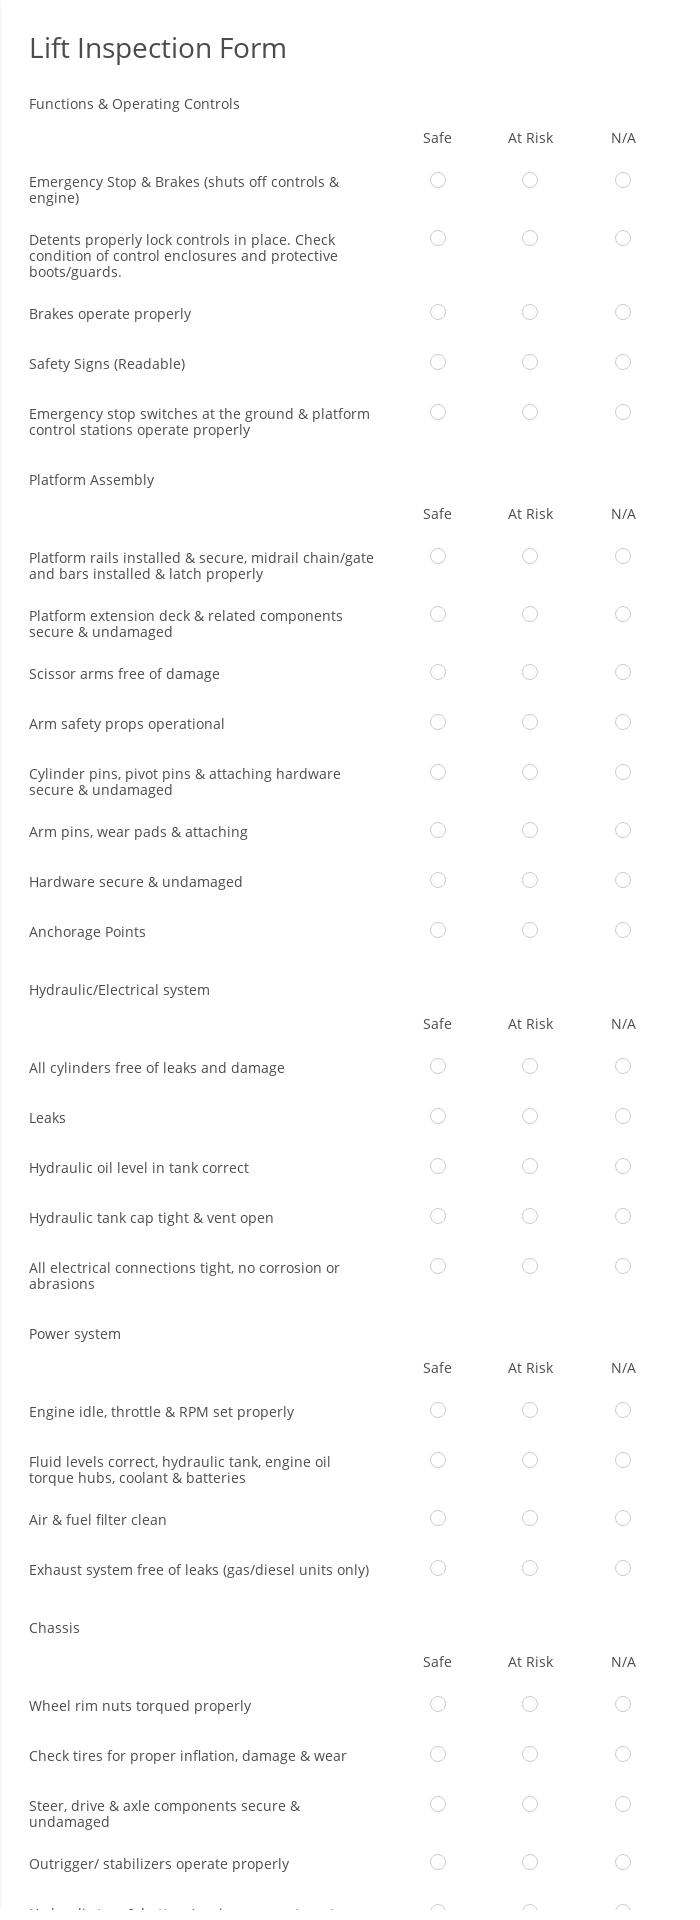 Lift Inspection Form